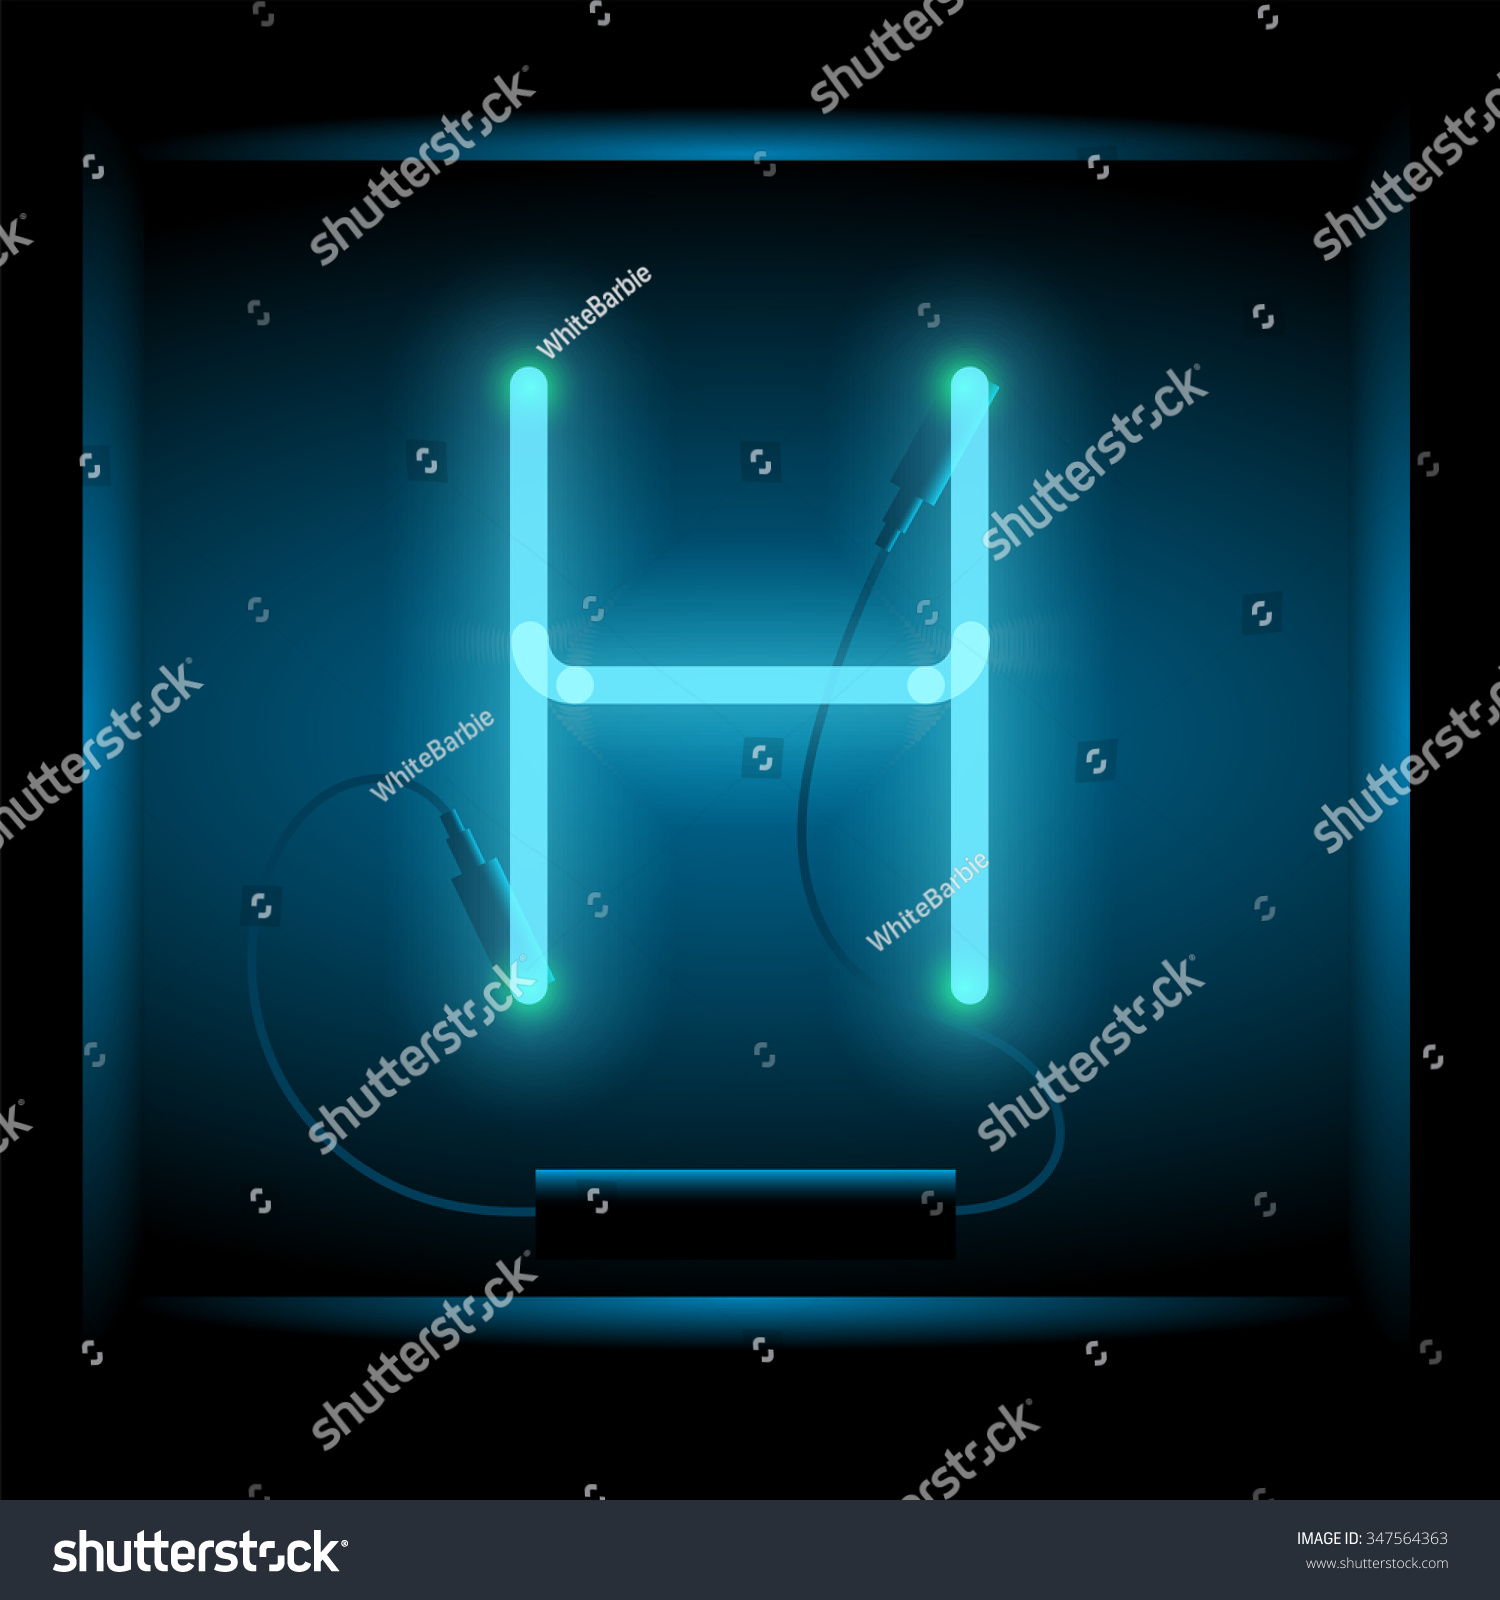 Realistic Neon Letter H Vector Illustration Stock Vector (Royalty Free ...